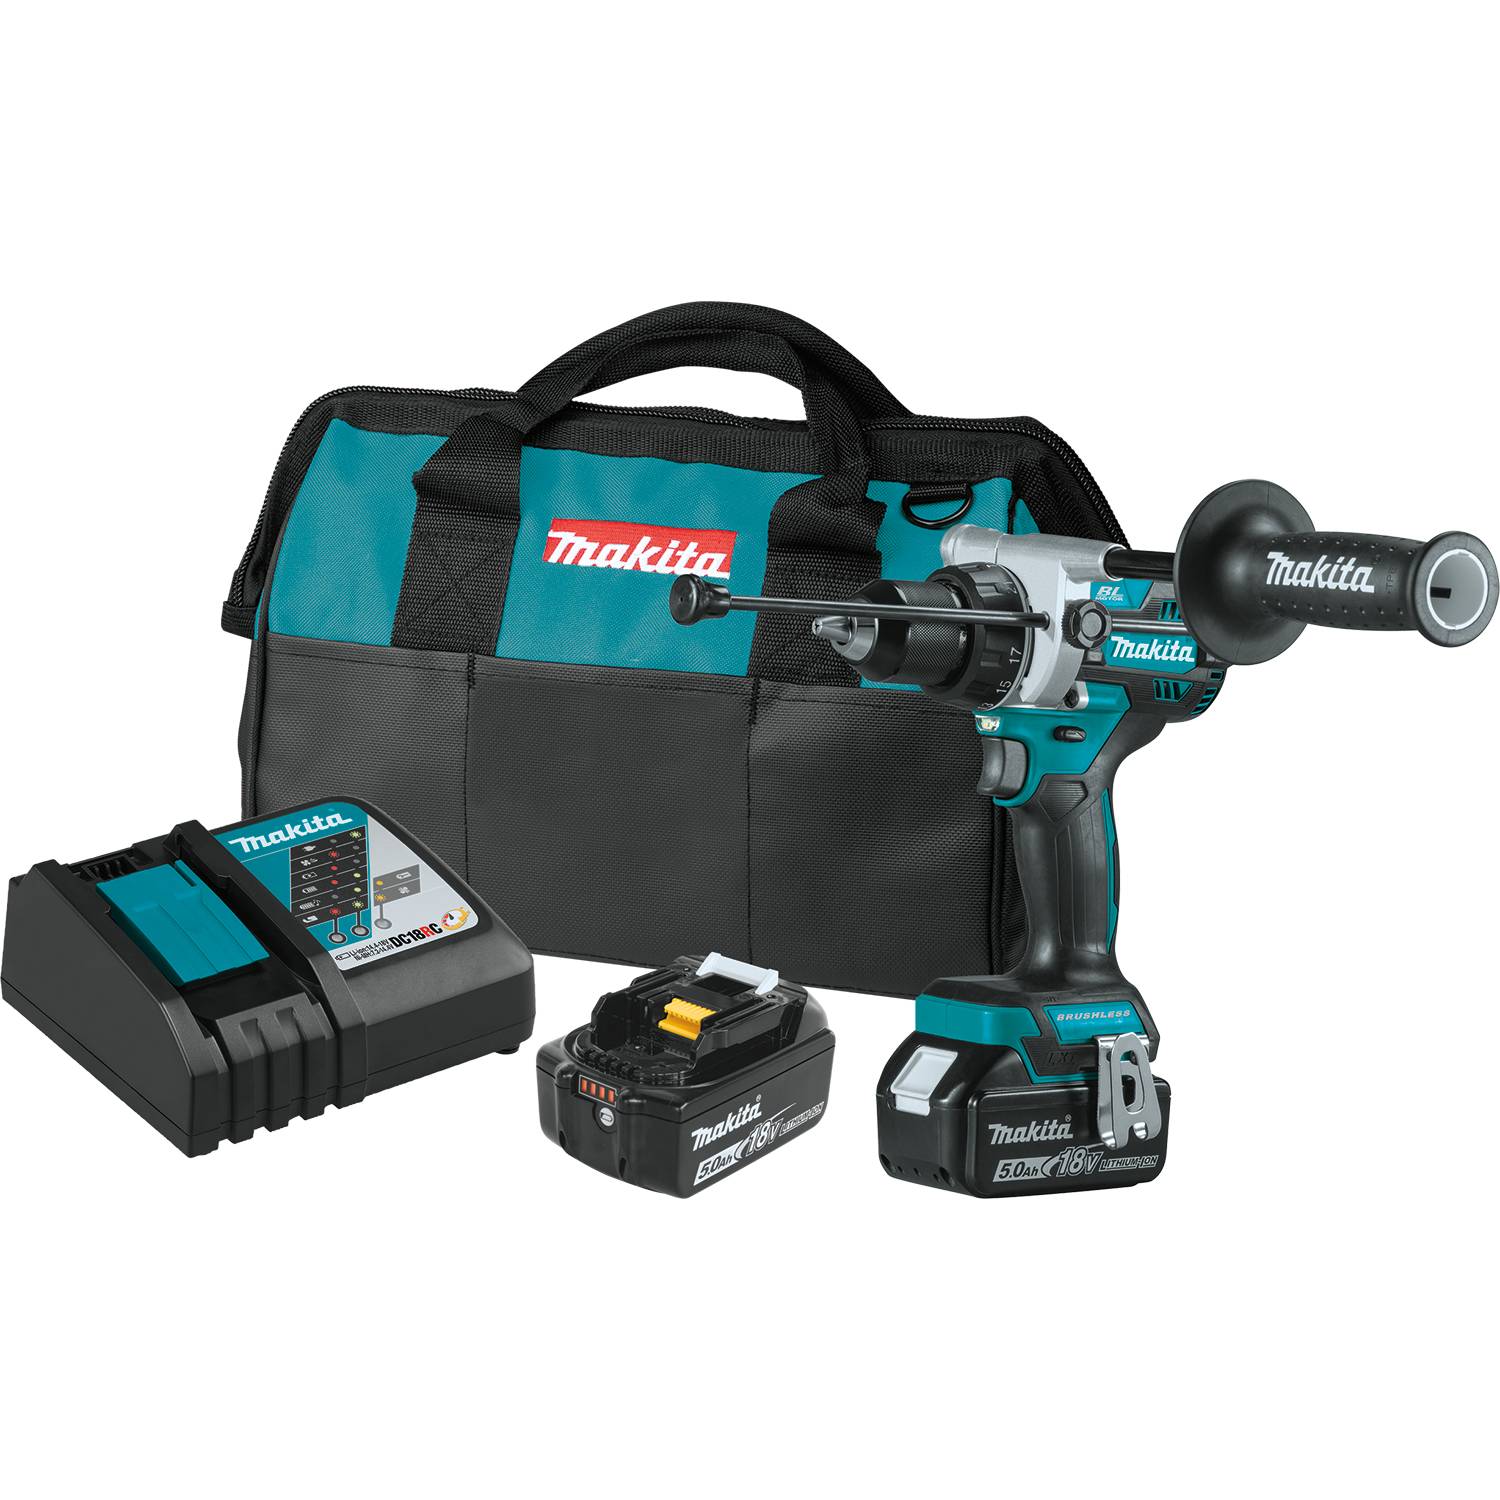 Makita 18V LXT Brushless Cordless 1/2 Inch Hammer Driver-Drill Kit from GME Supply